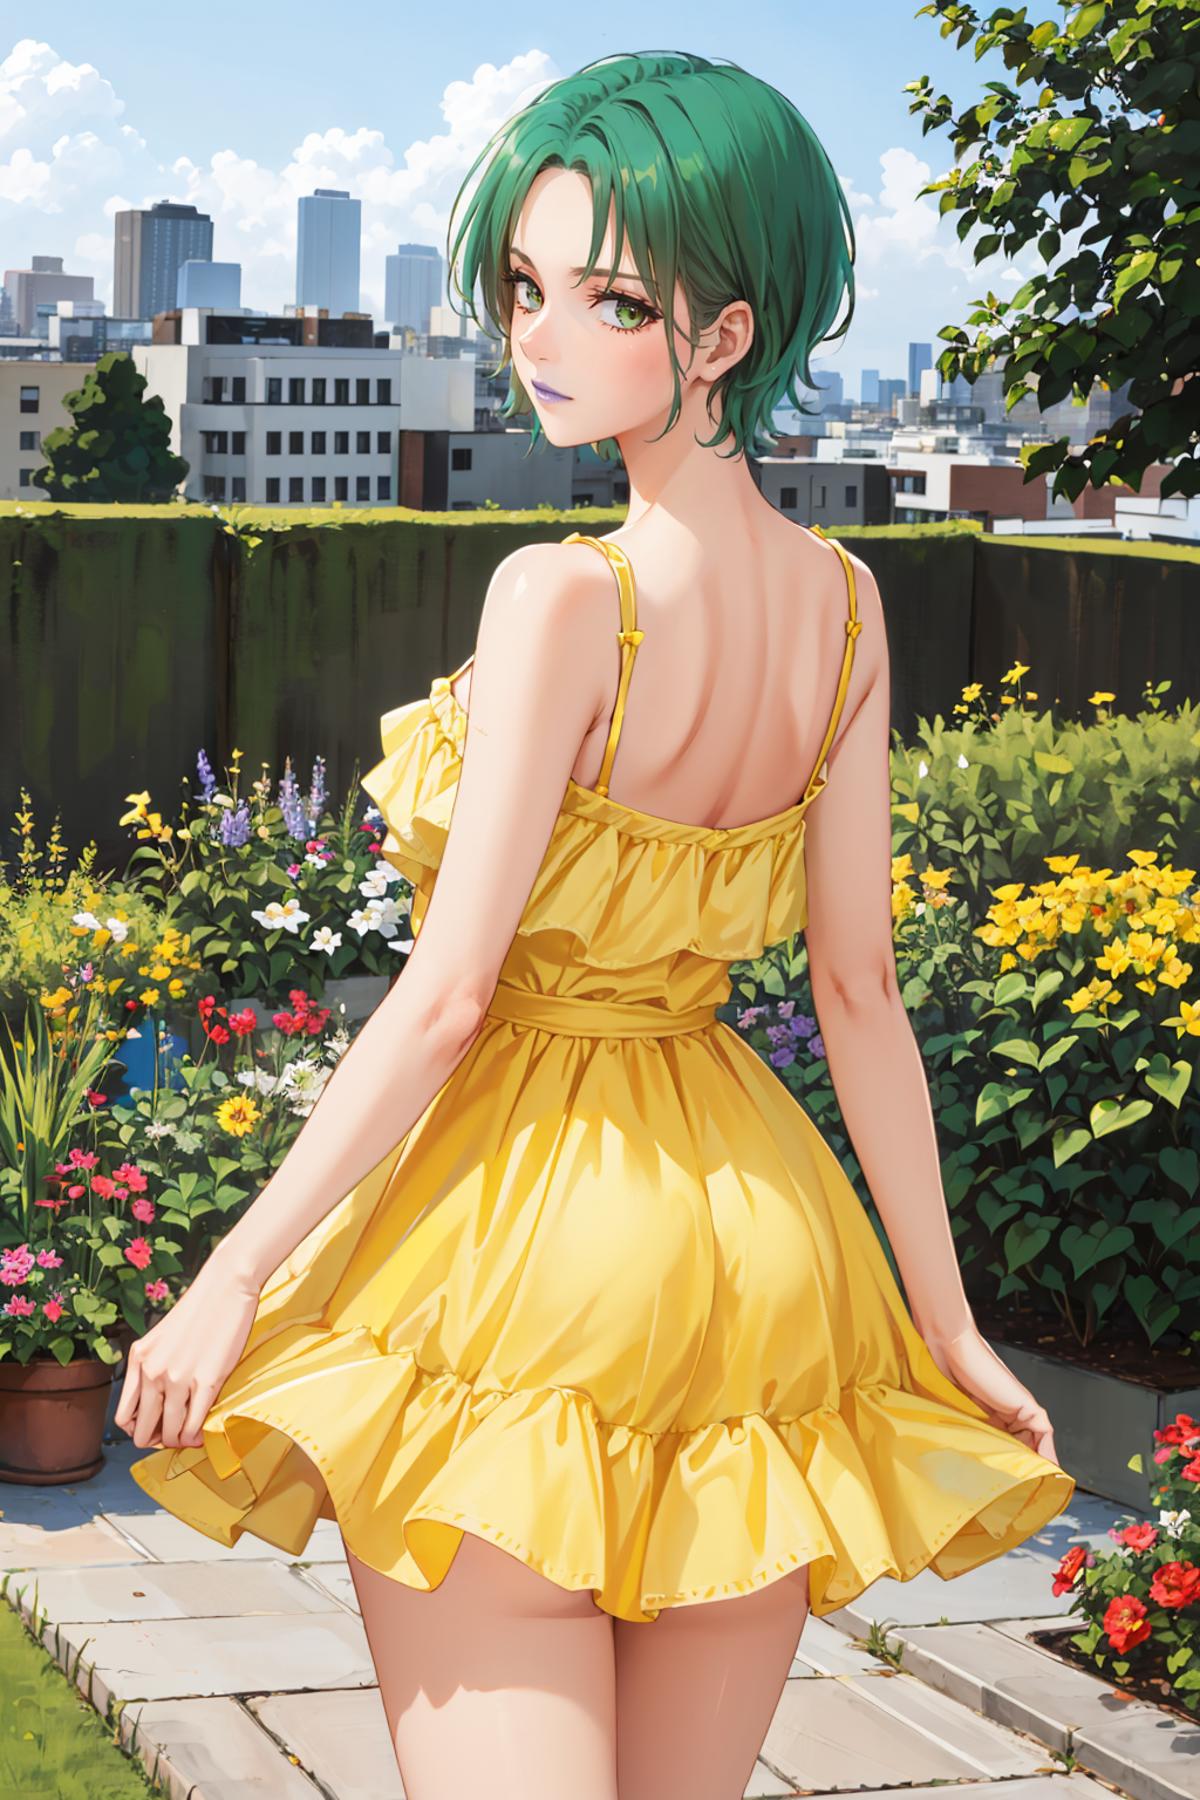 Yellow Sundress - by EDG inspired by ChameleonAI image by novowels